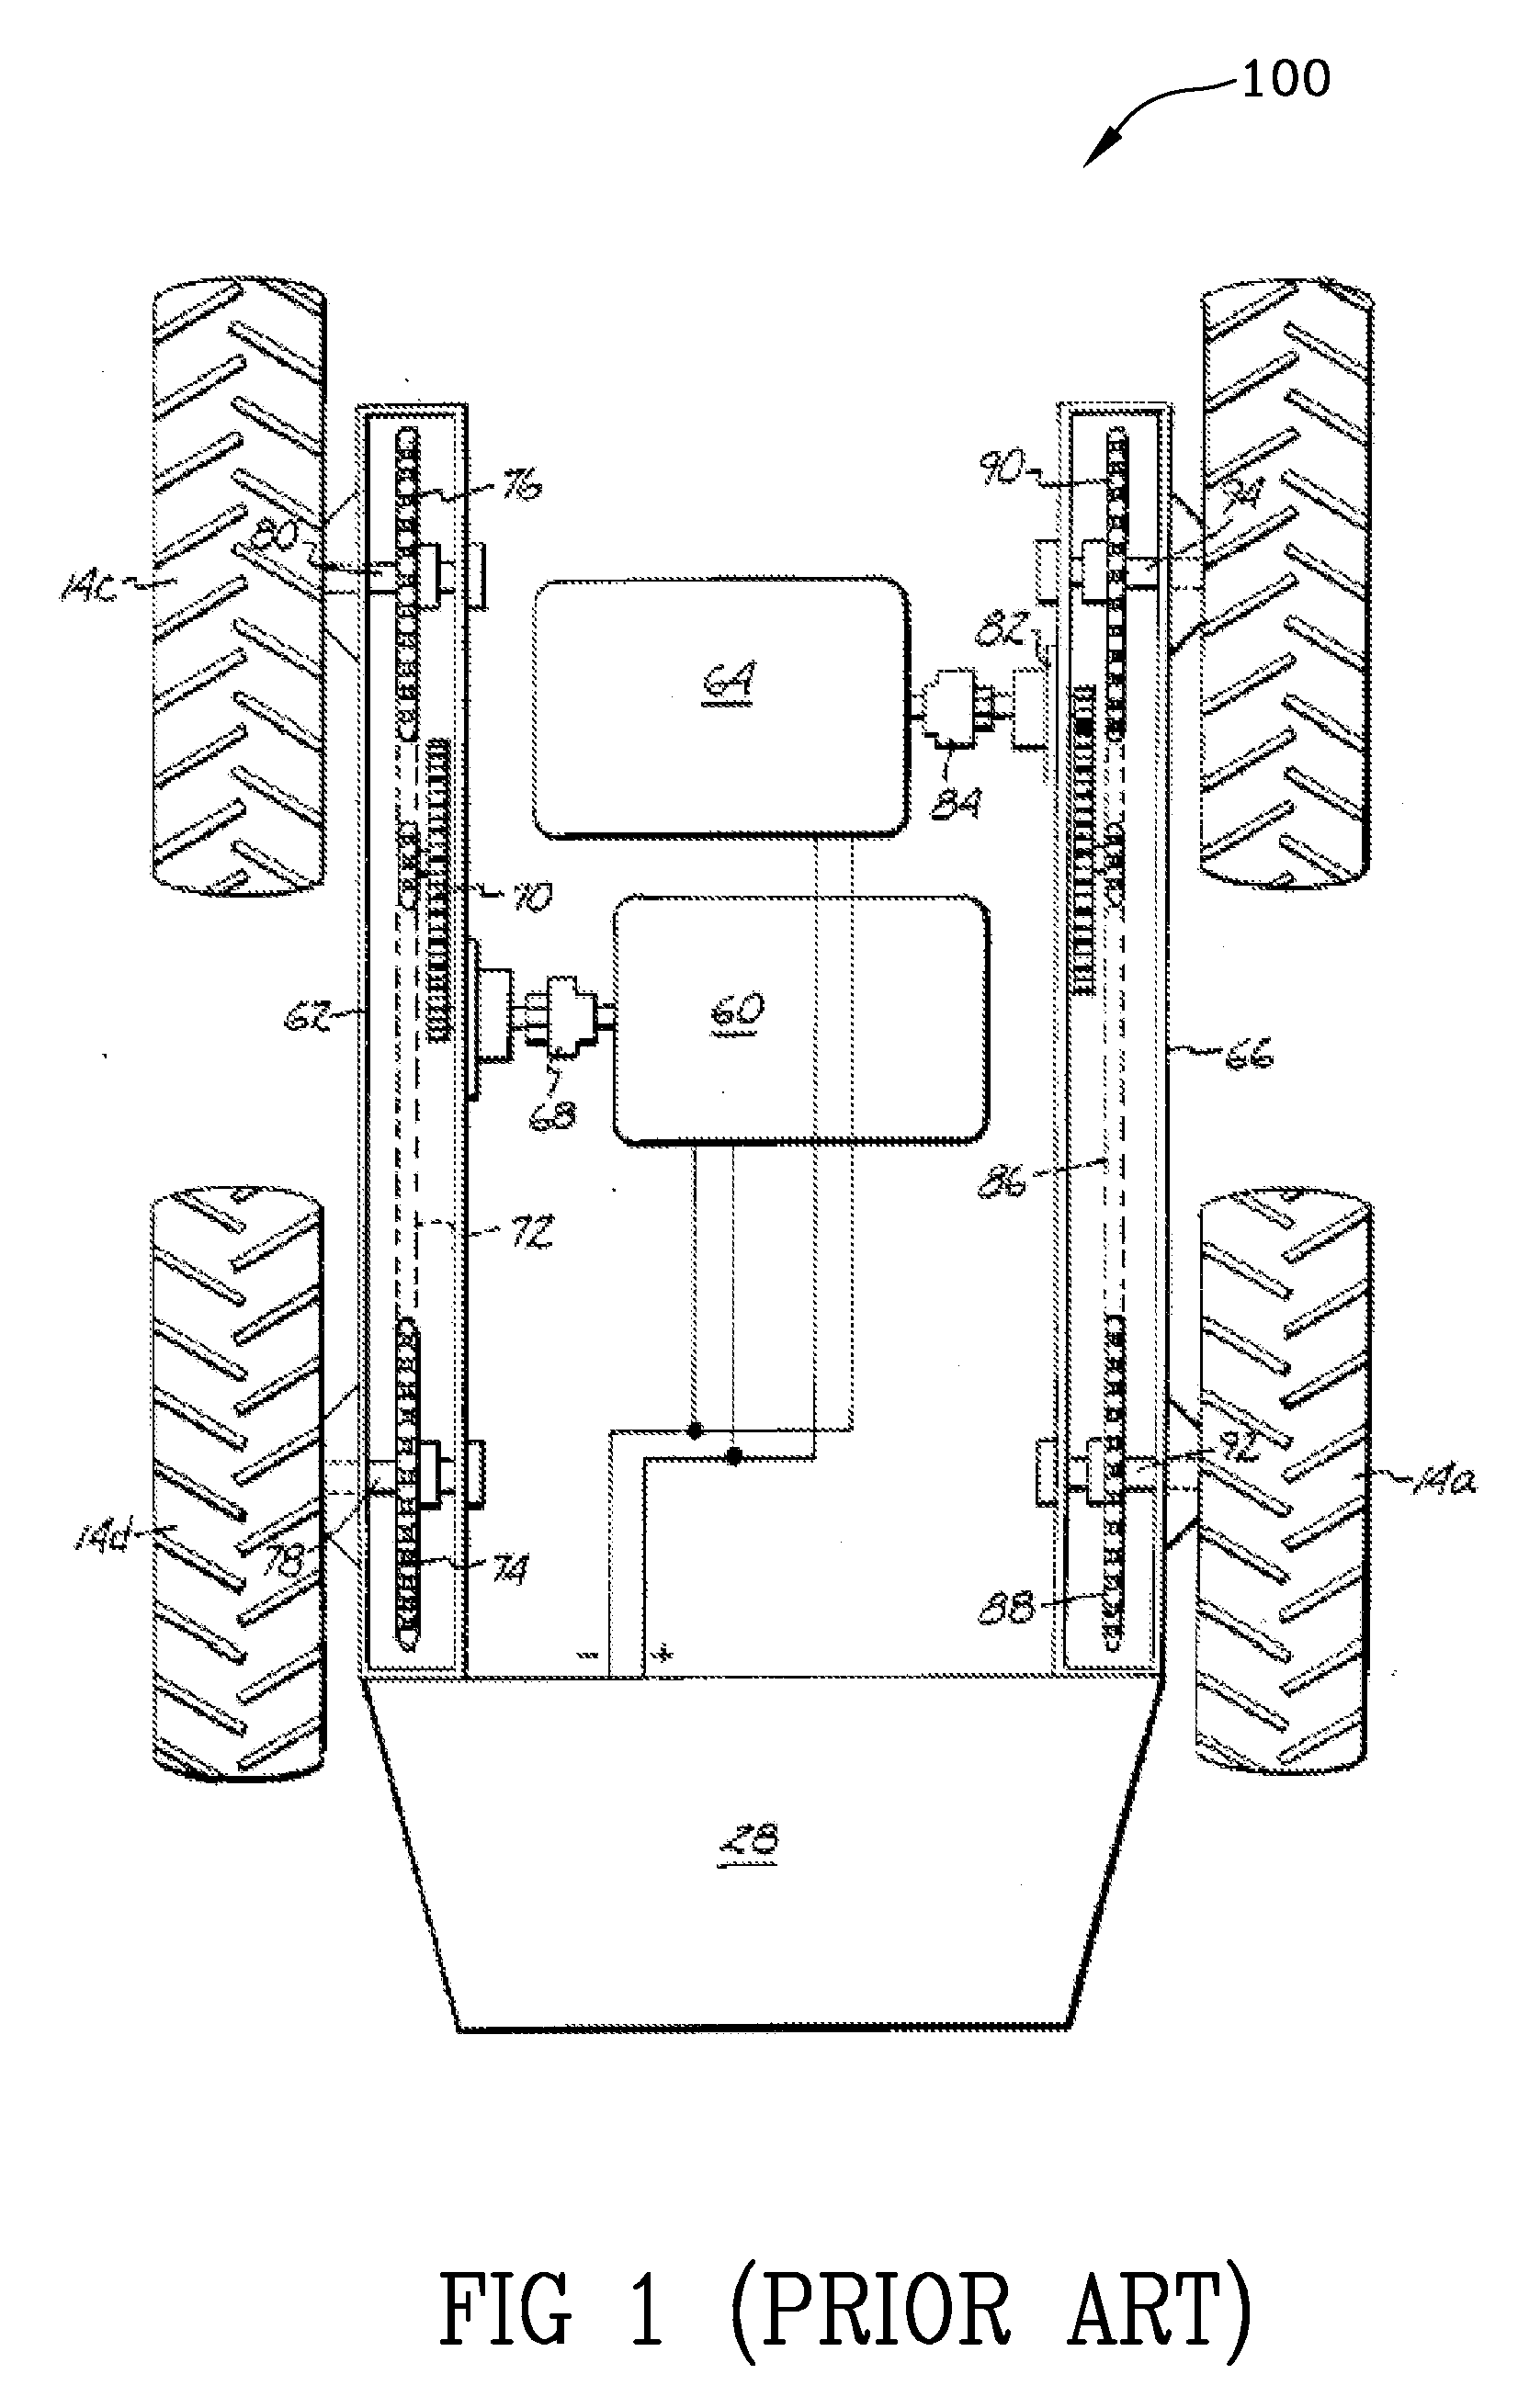 Offset drive system for utility vehicles